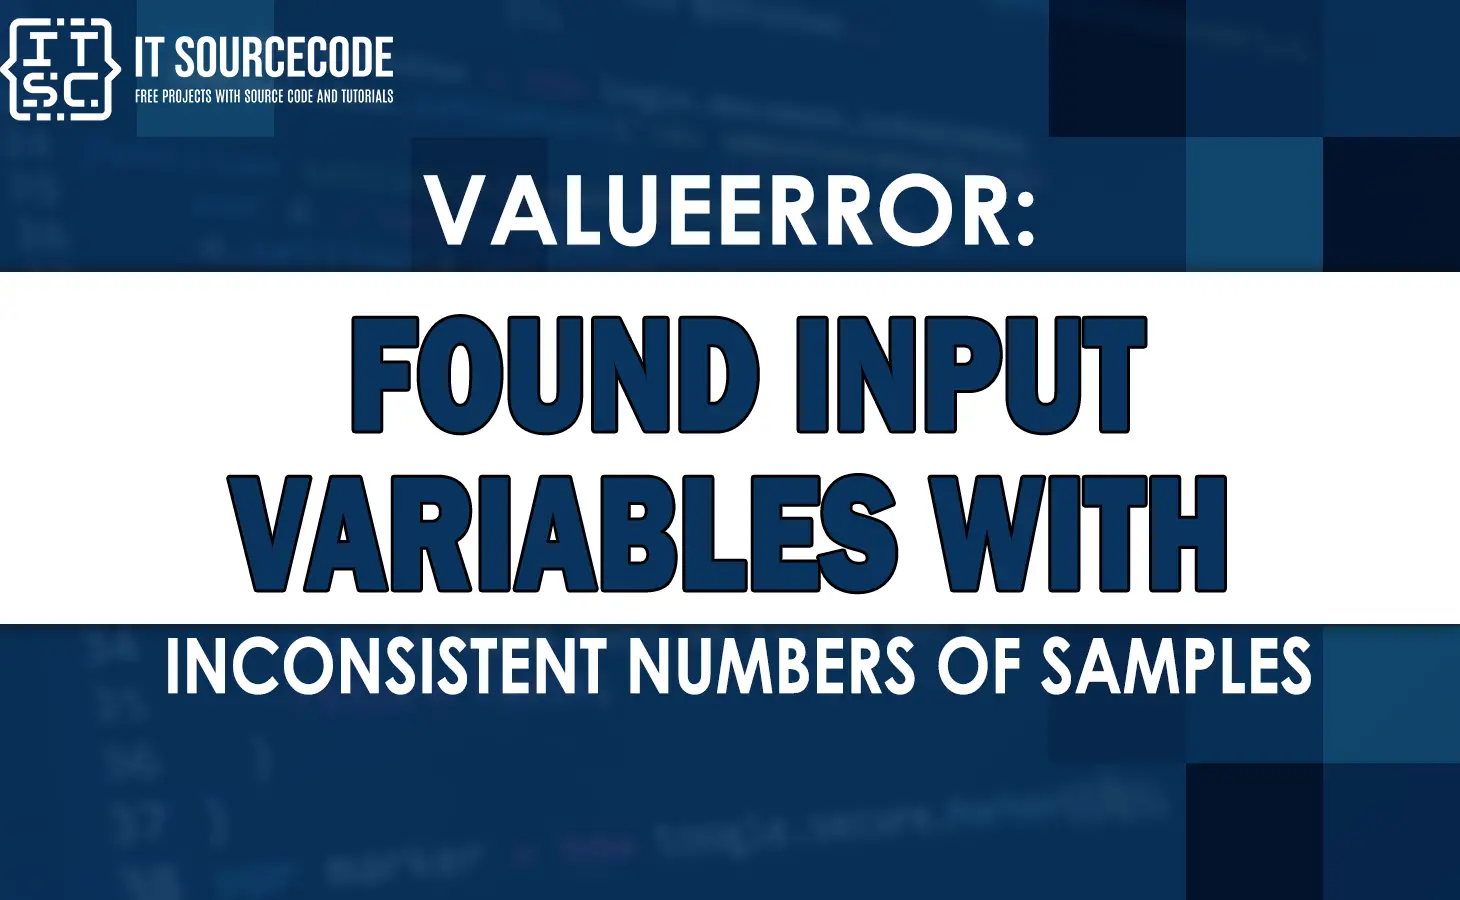 Found input variables with inconsistent numbers of samples